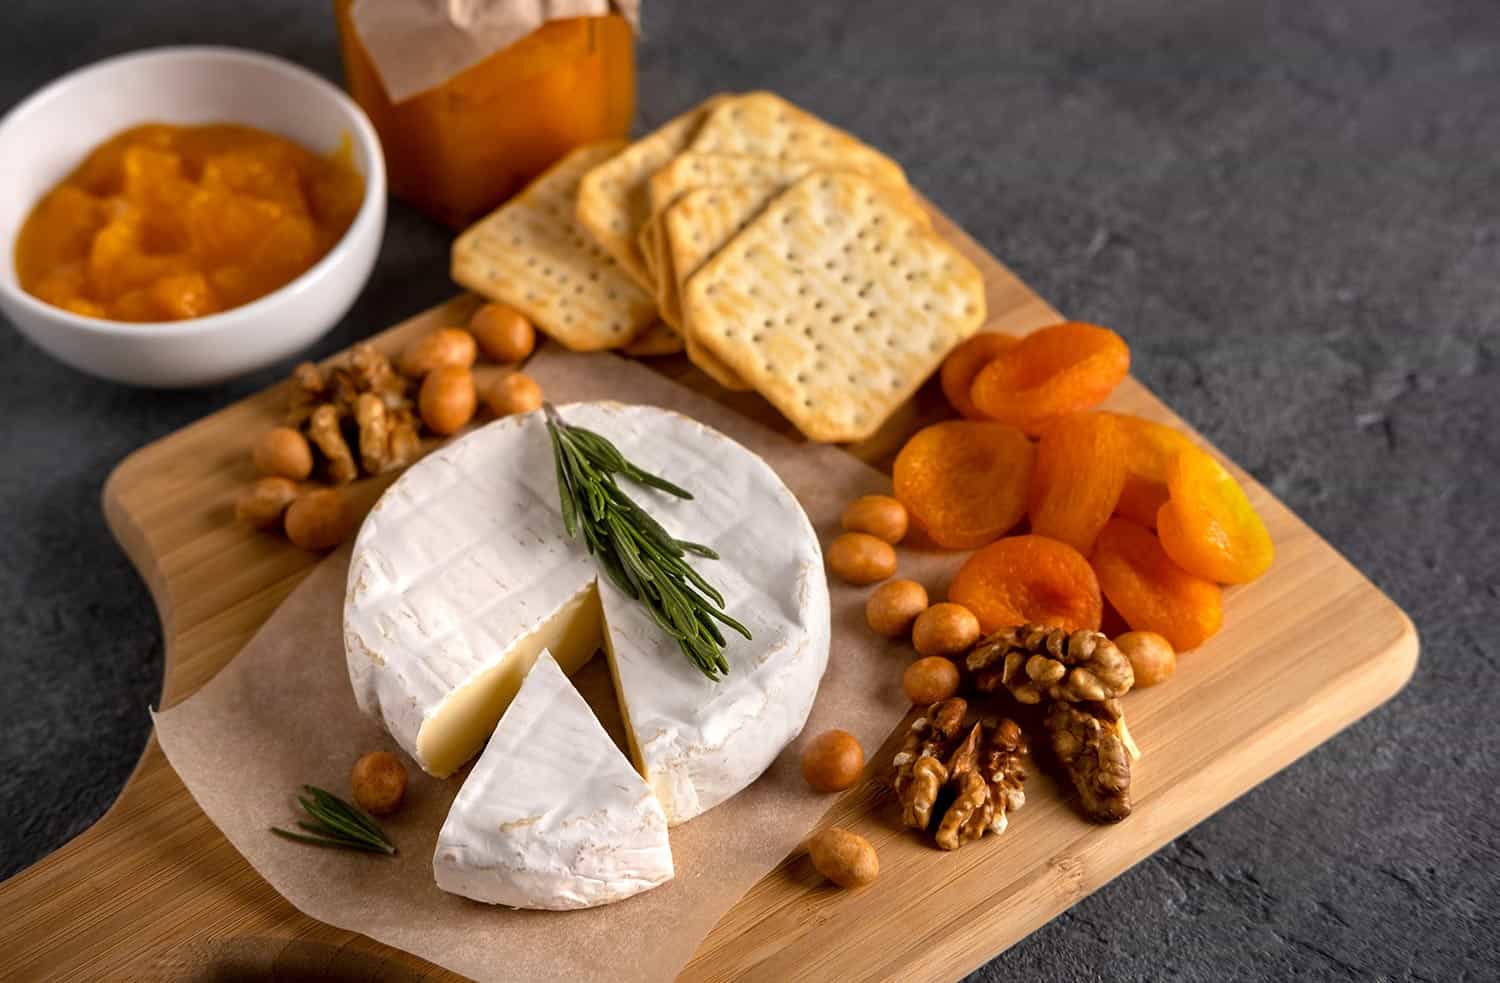 Brie cheese with nuts, pear slices and dried apricots